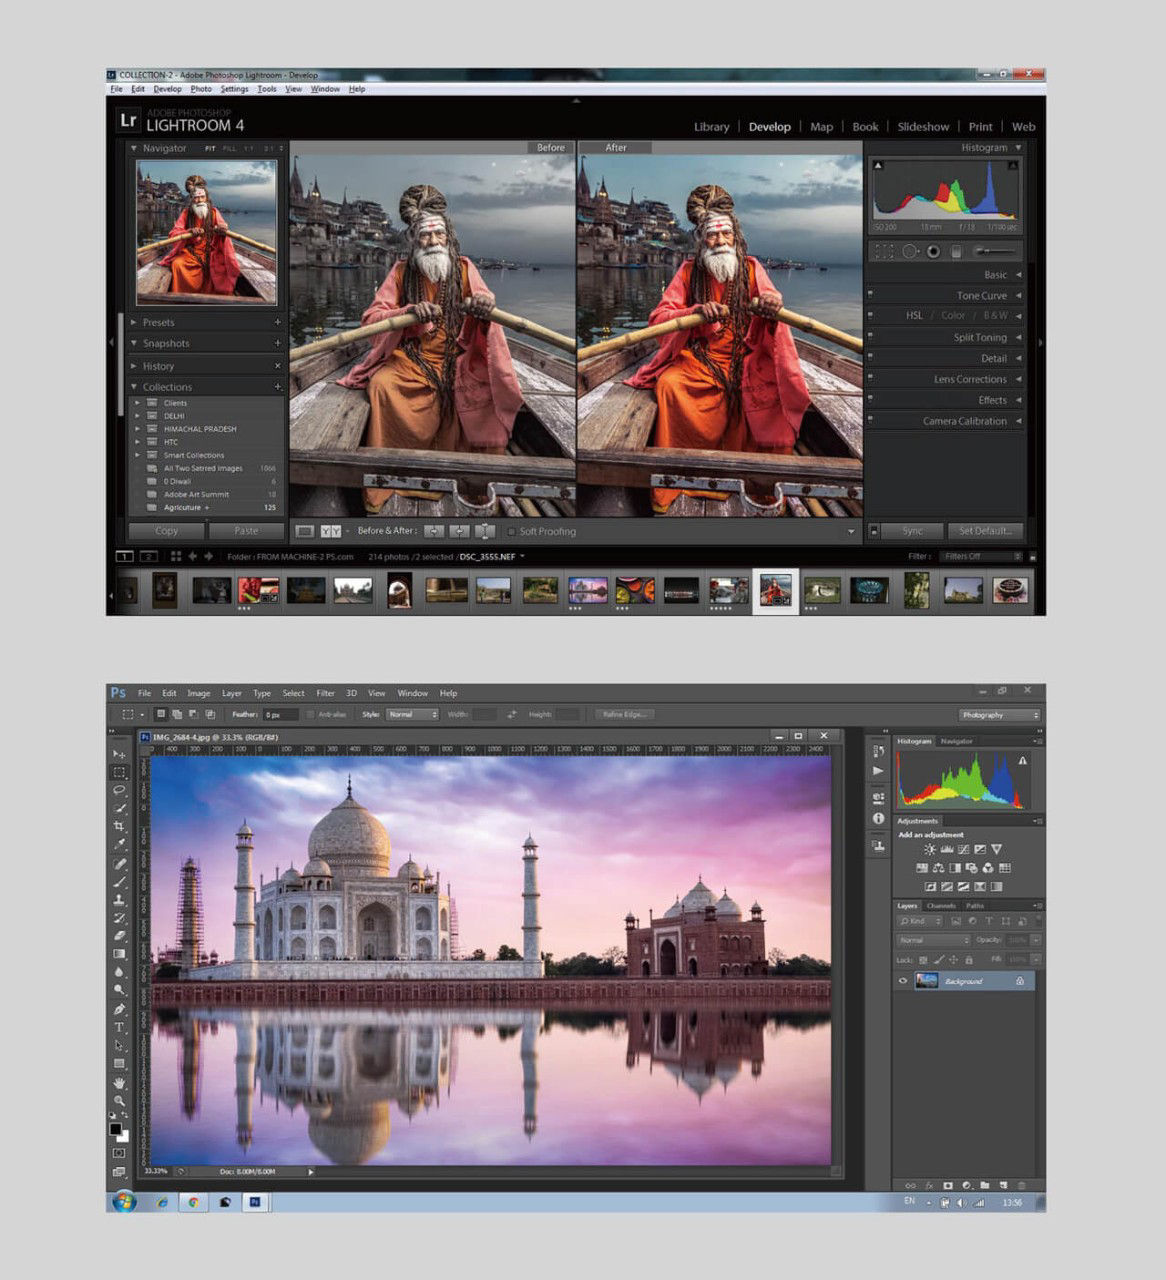 This is the photo edit software Lightroom which is perfect for photographers to edit photos.